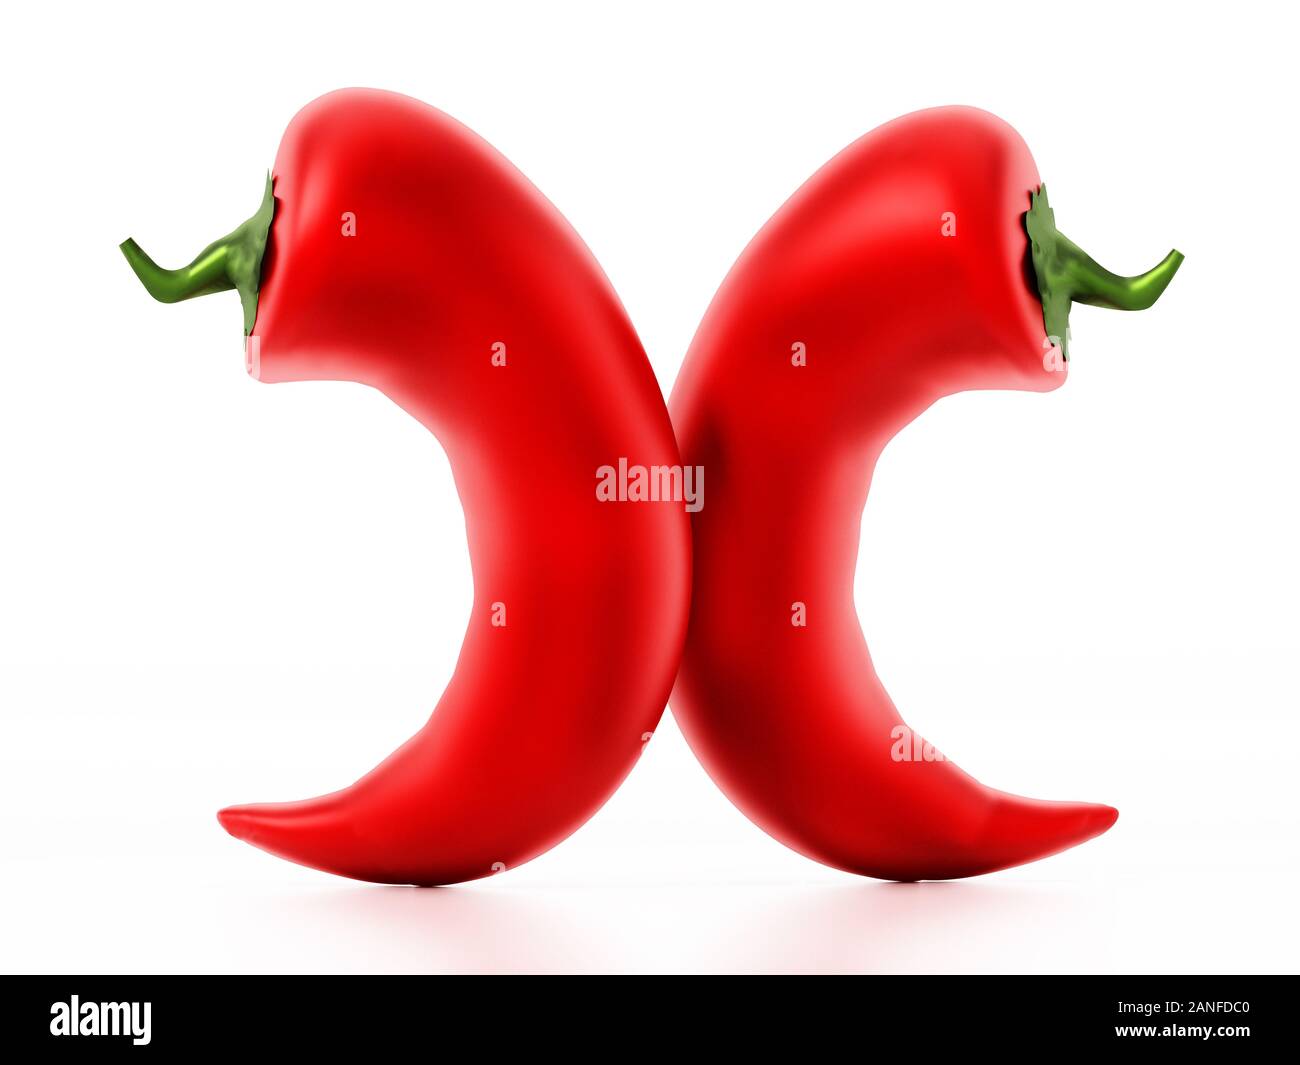 Red peppers isolated on white background. 3D illustration. Stock Photo